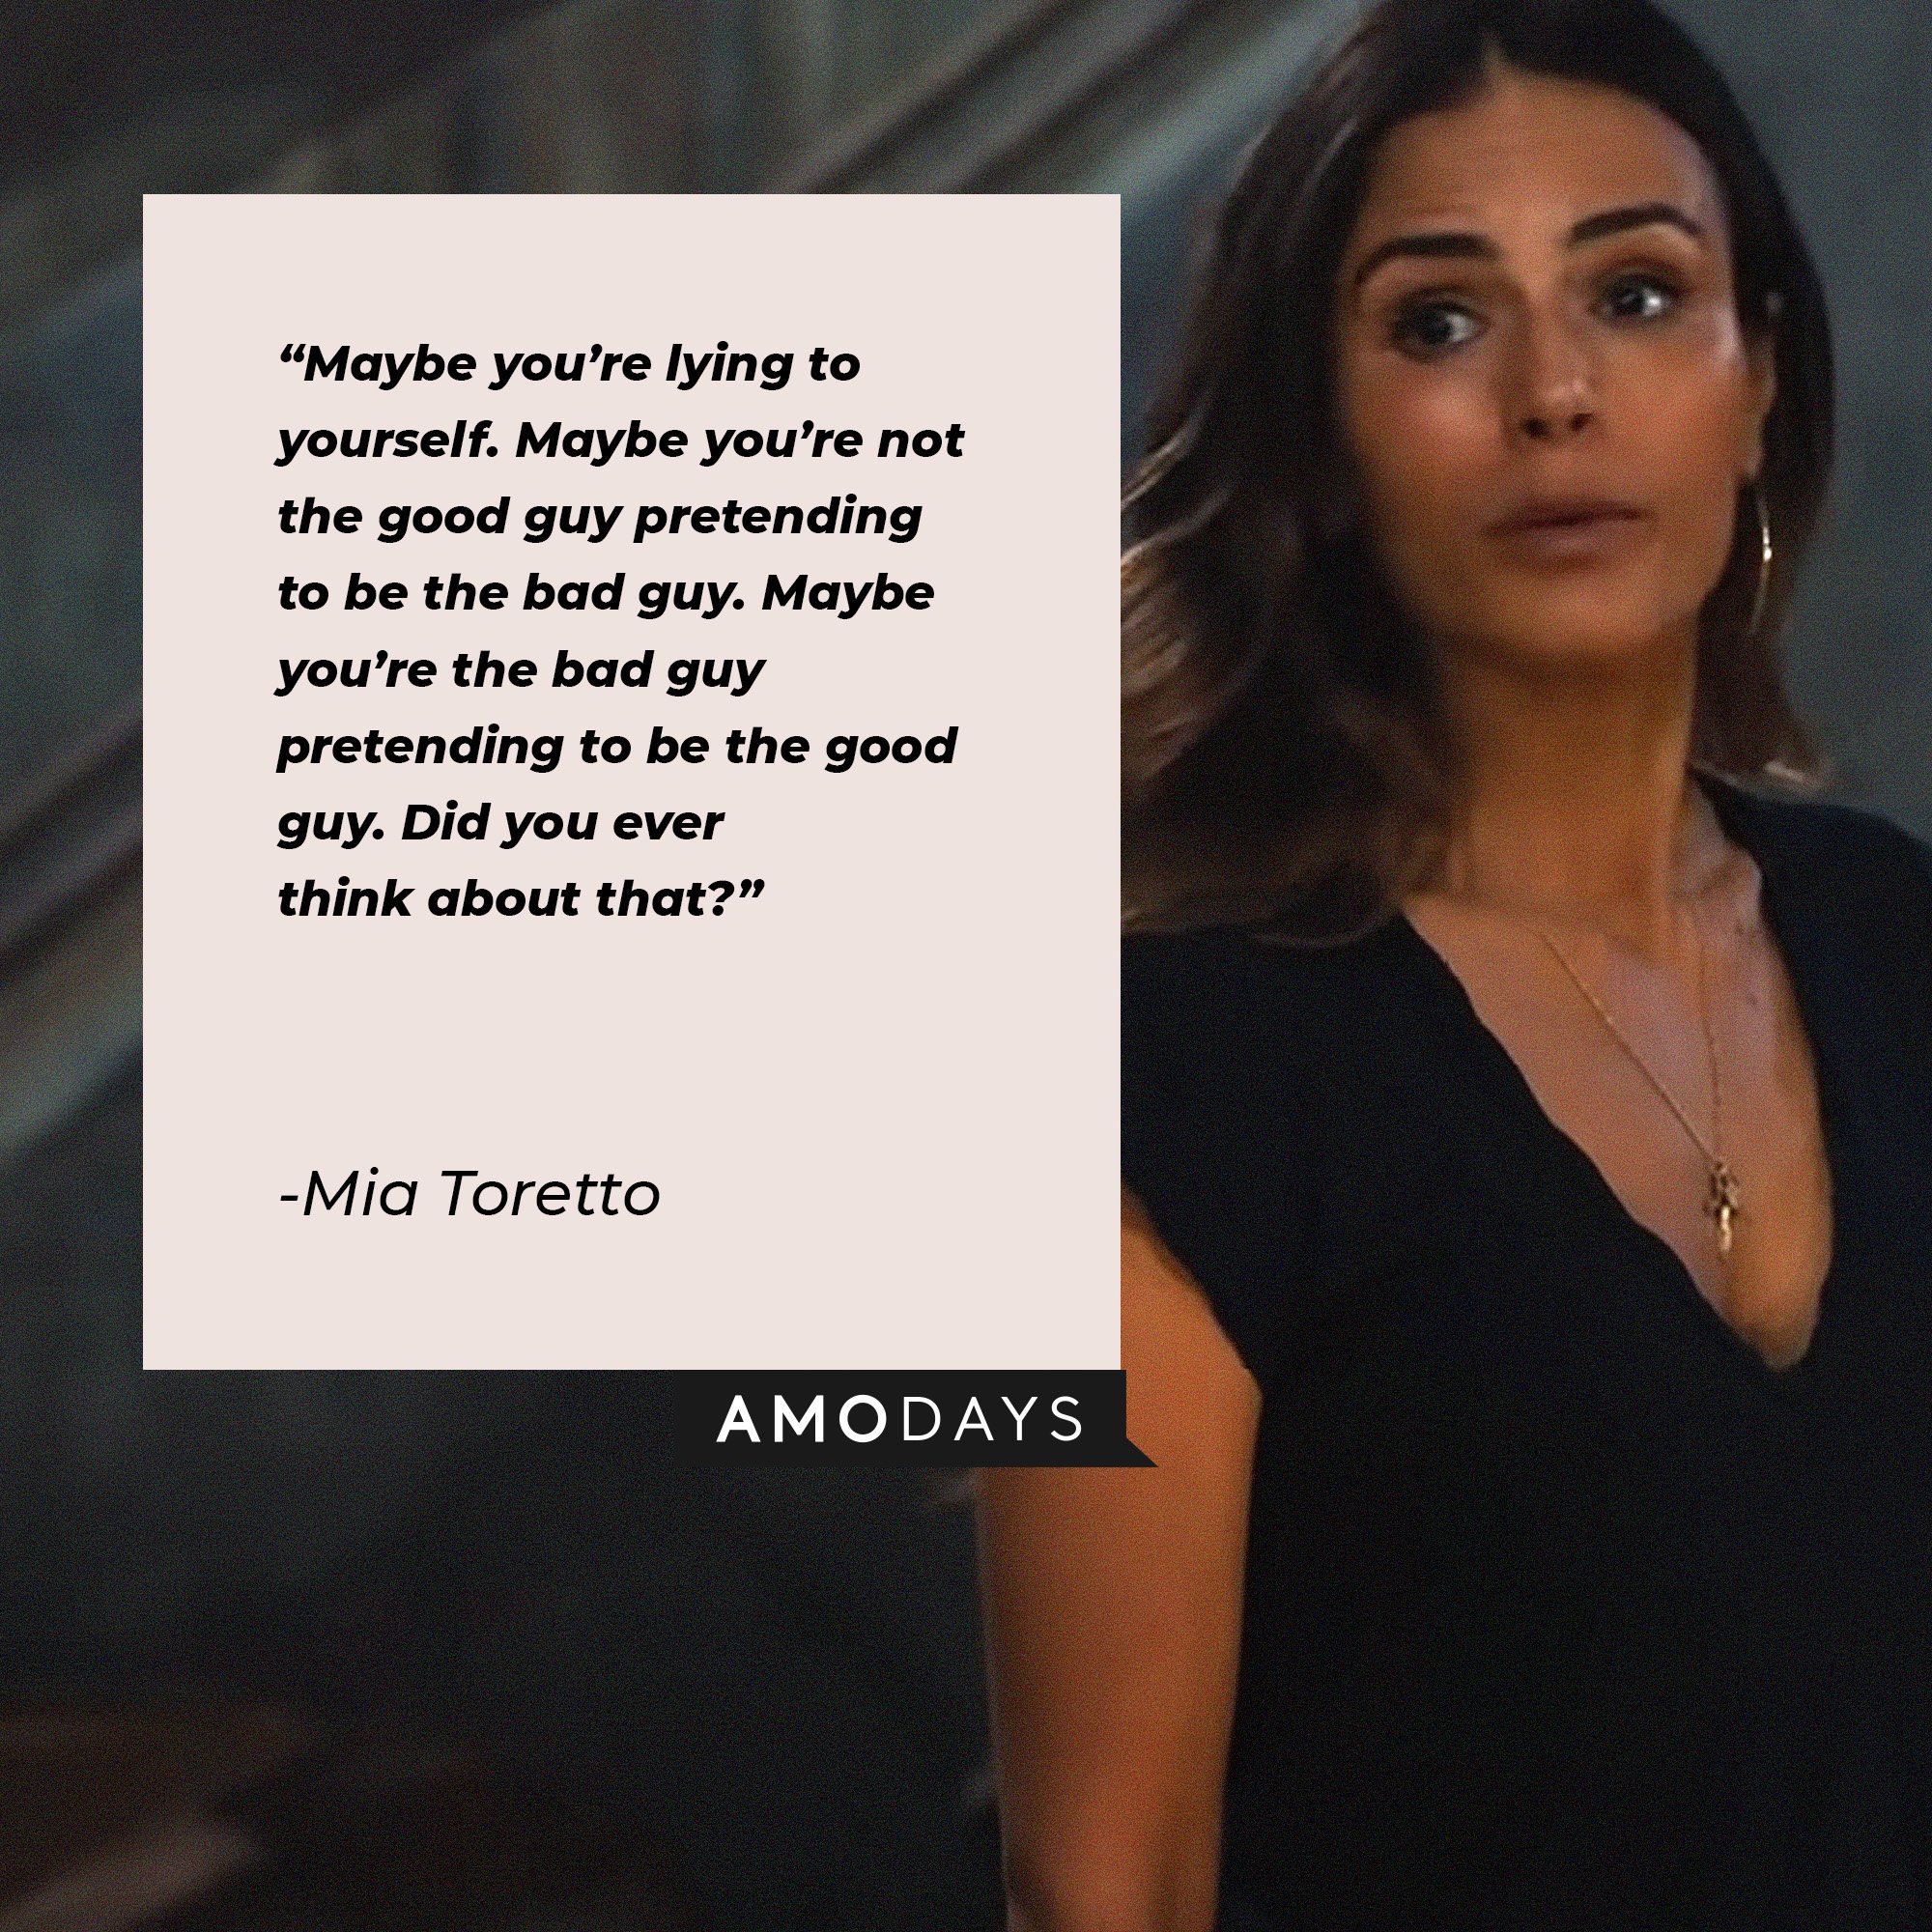 Mia Toretto's quote: "Maybe you’re lying to yourself. Maybe you’re not the good guy pretending to be the bad guy. Maybe you’re the bad guy pretending to be the good guy. Did you ever think about that?" │Image: AmoDays